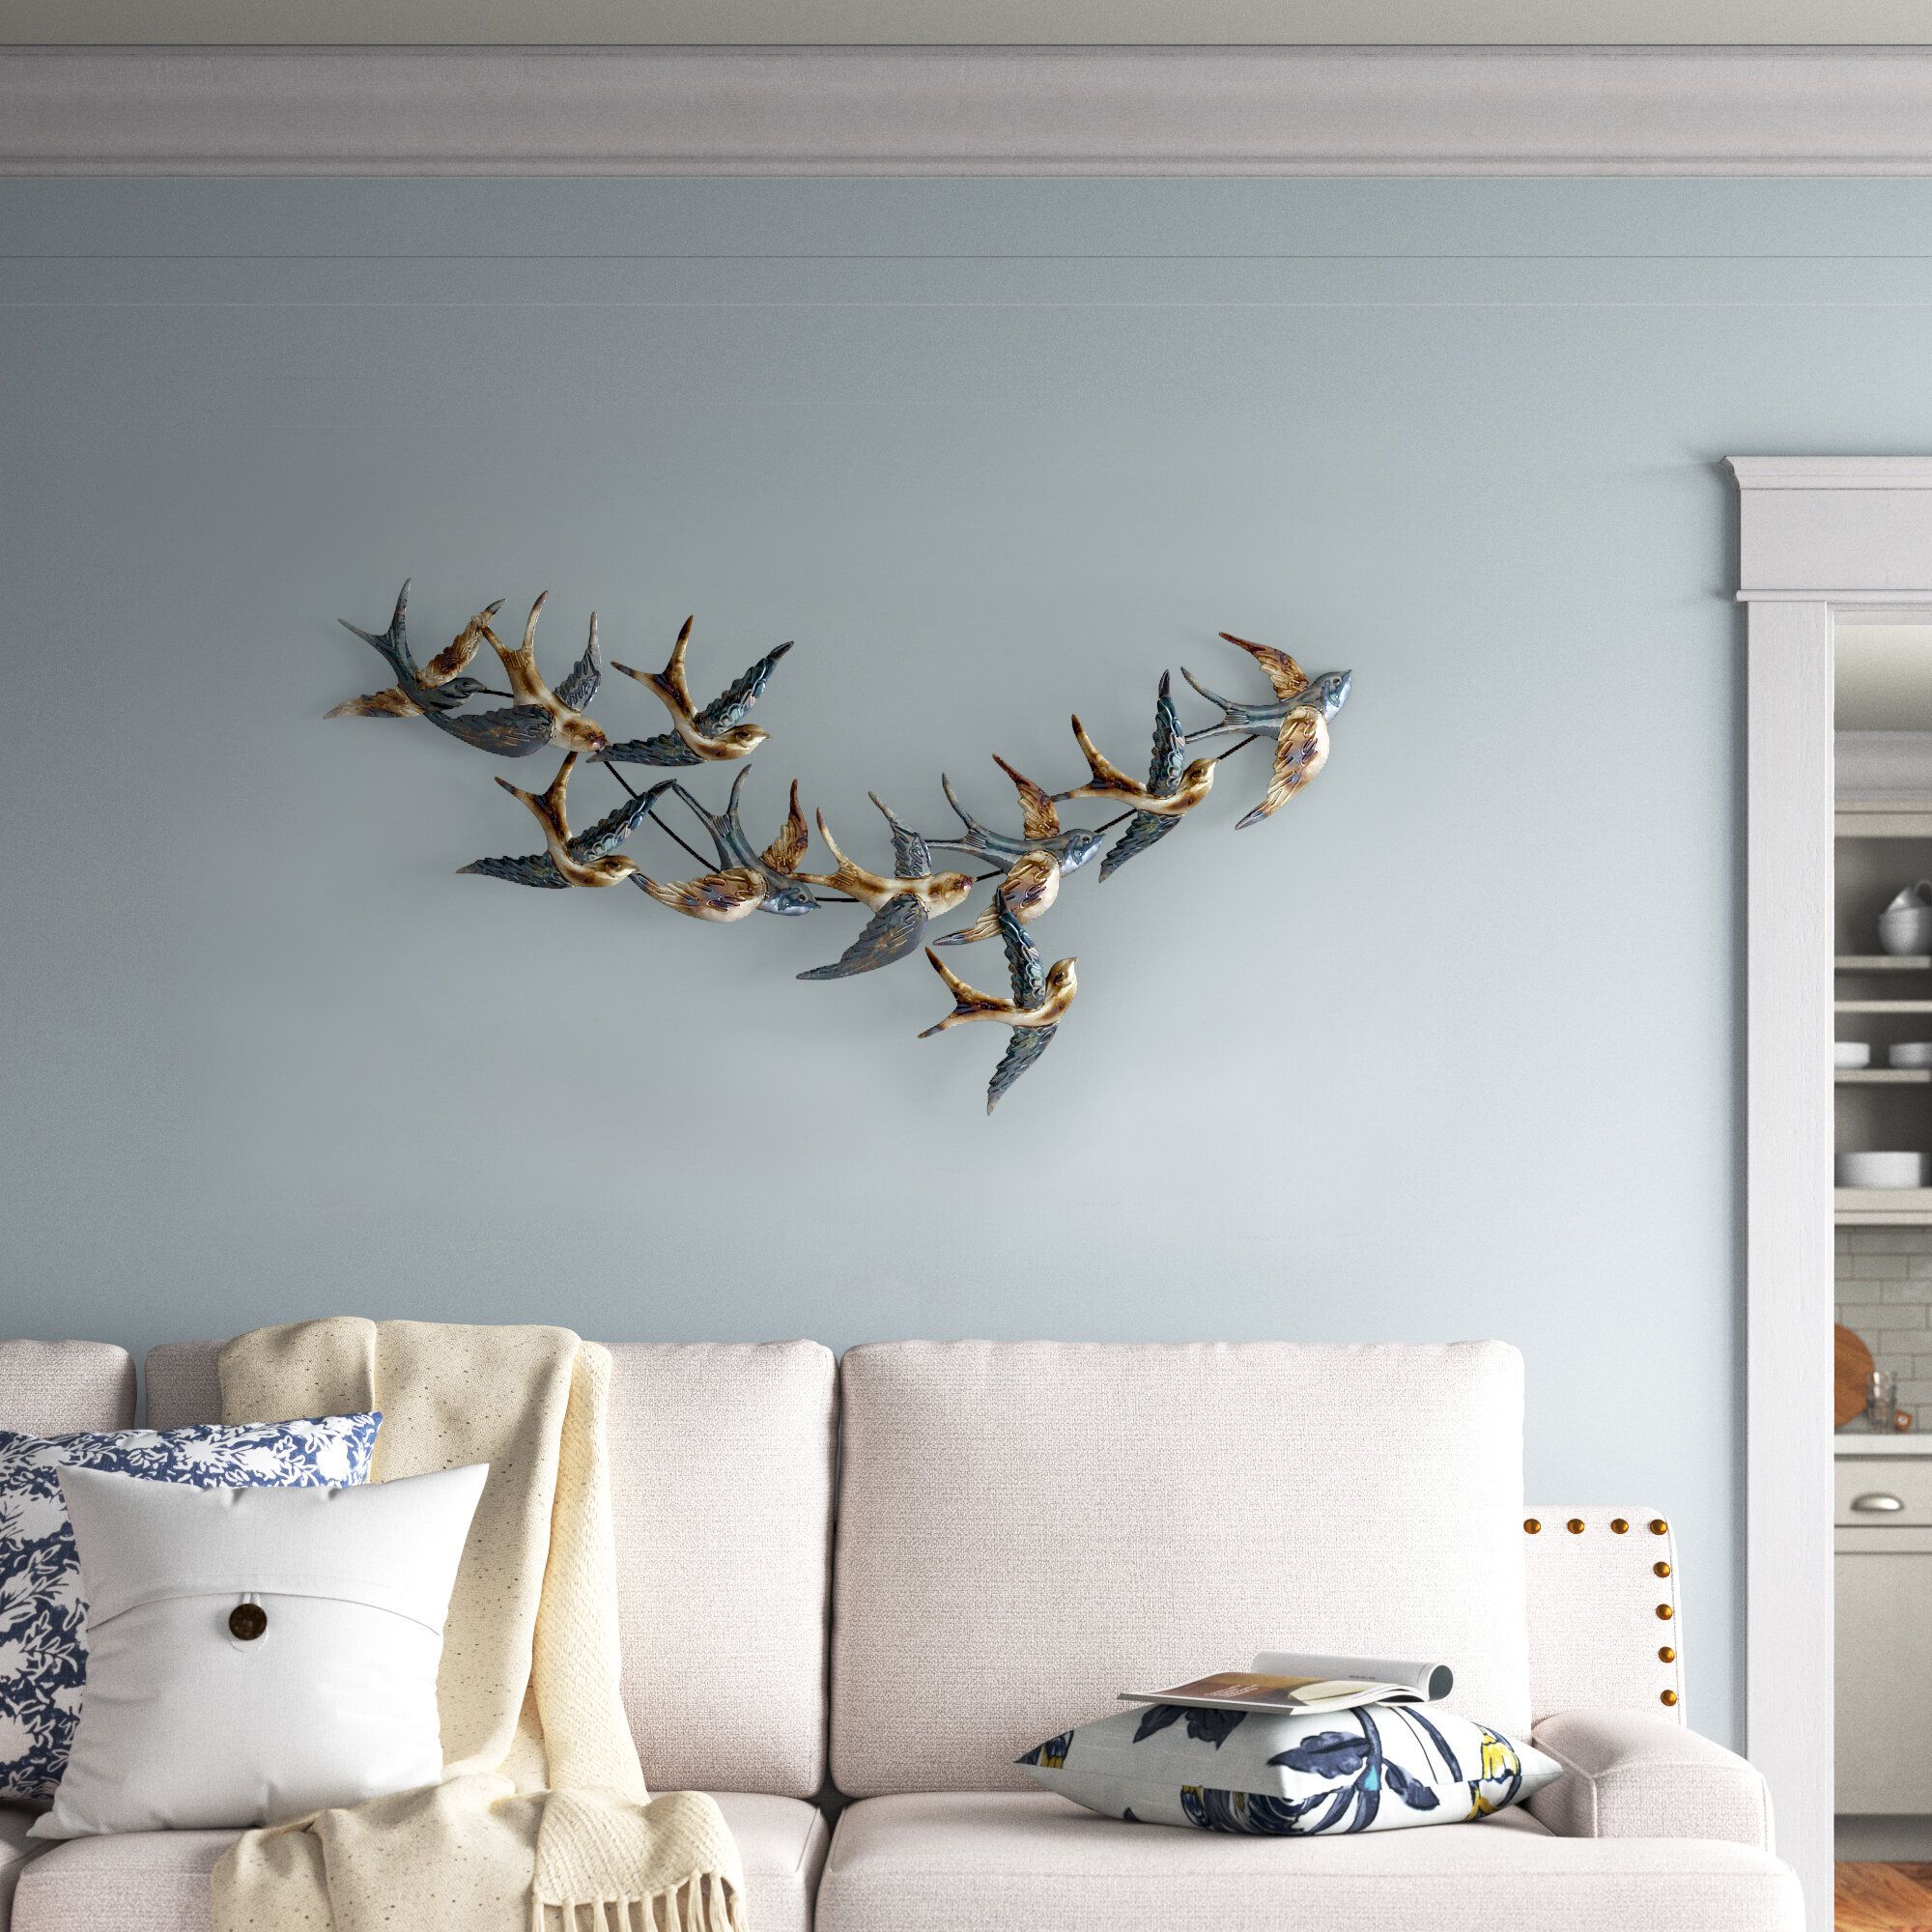 Red Barrel Studio® Wall Decor Metal & Reviews – Wayfair Canada Intended For Most Current Metal Bird Wall Sculpture Wall Art (View 12 of 20)